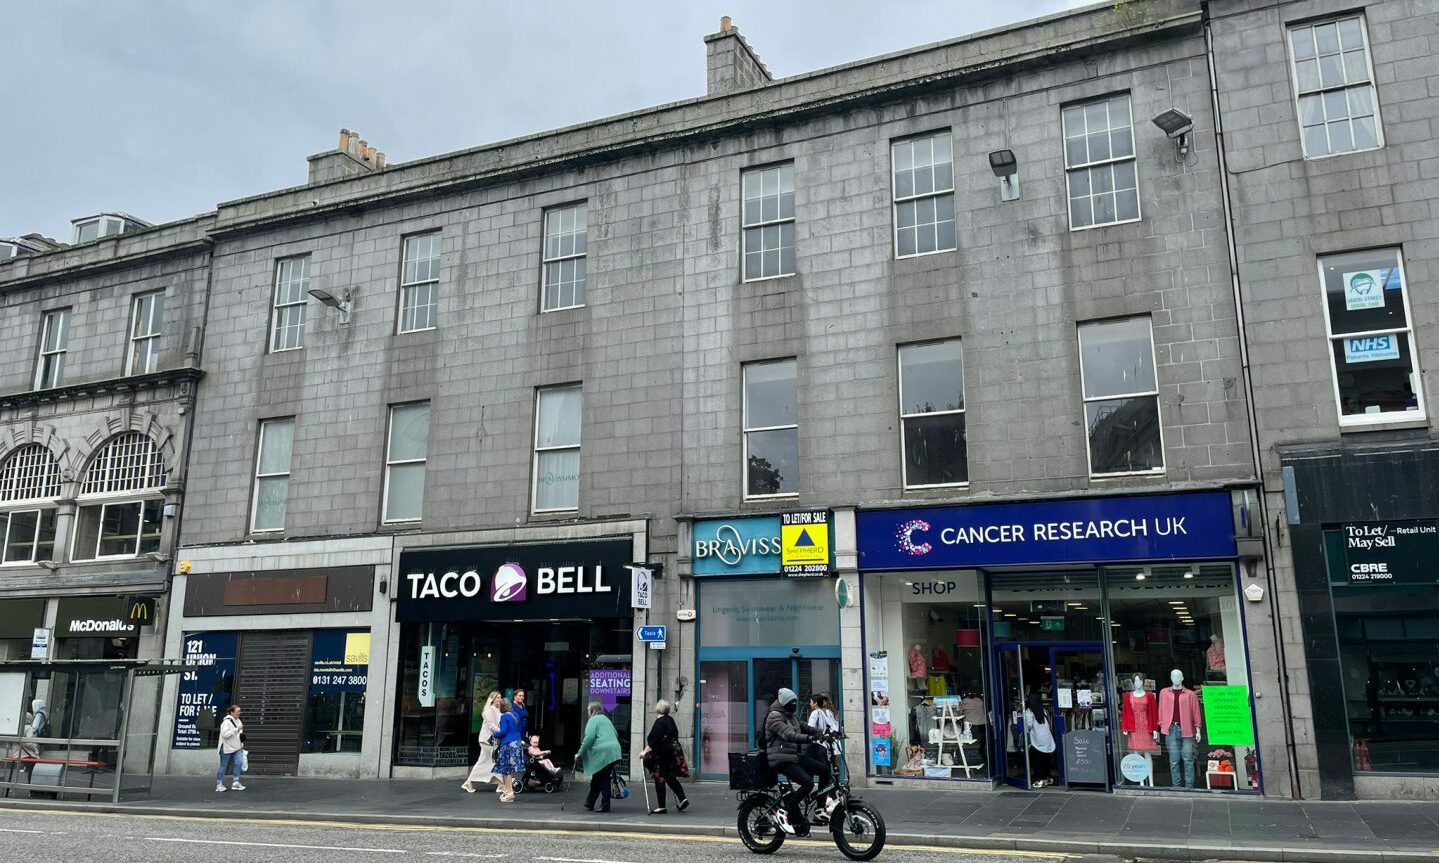 The street also contains a Taco Bell branch, a closed bra shop and a Cancer Research charity shop - all sandwiched between two other empty units.